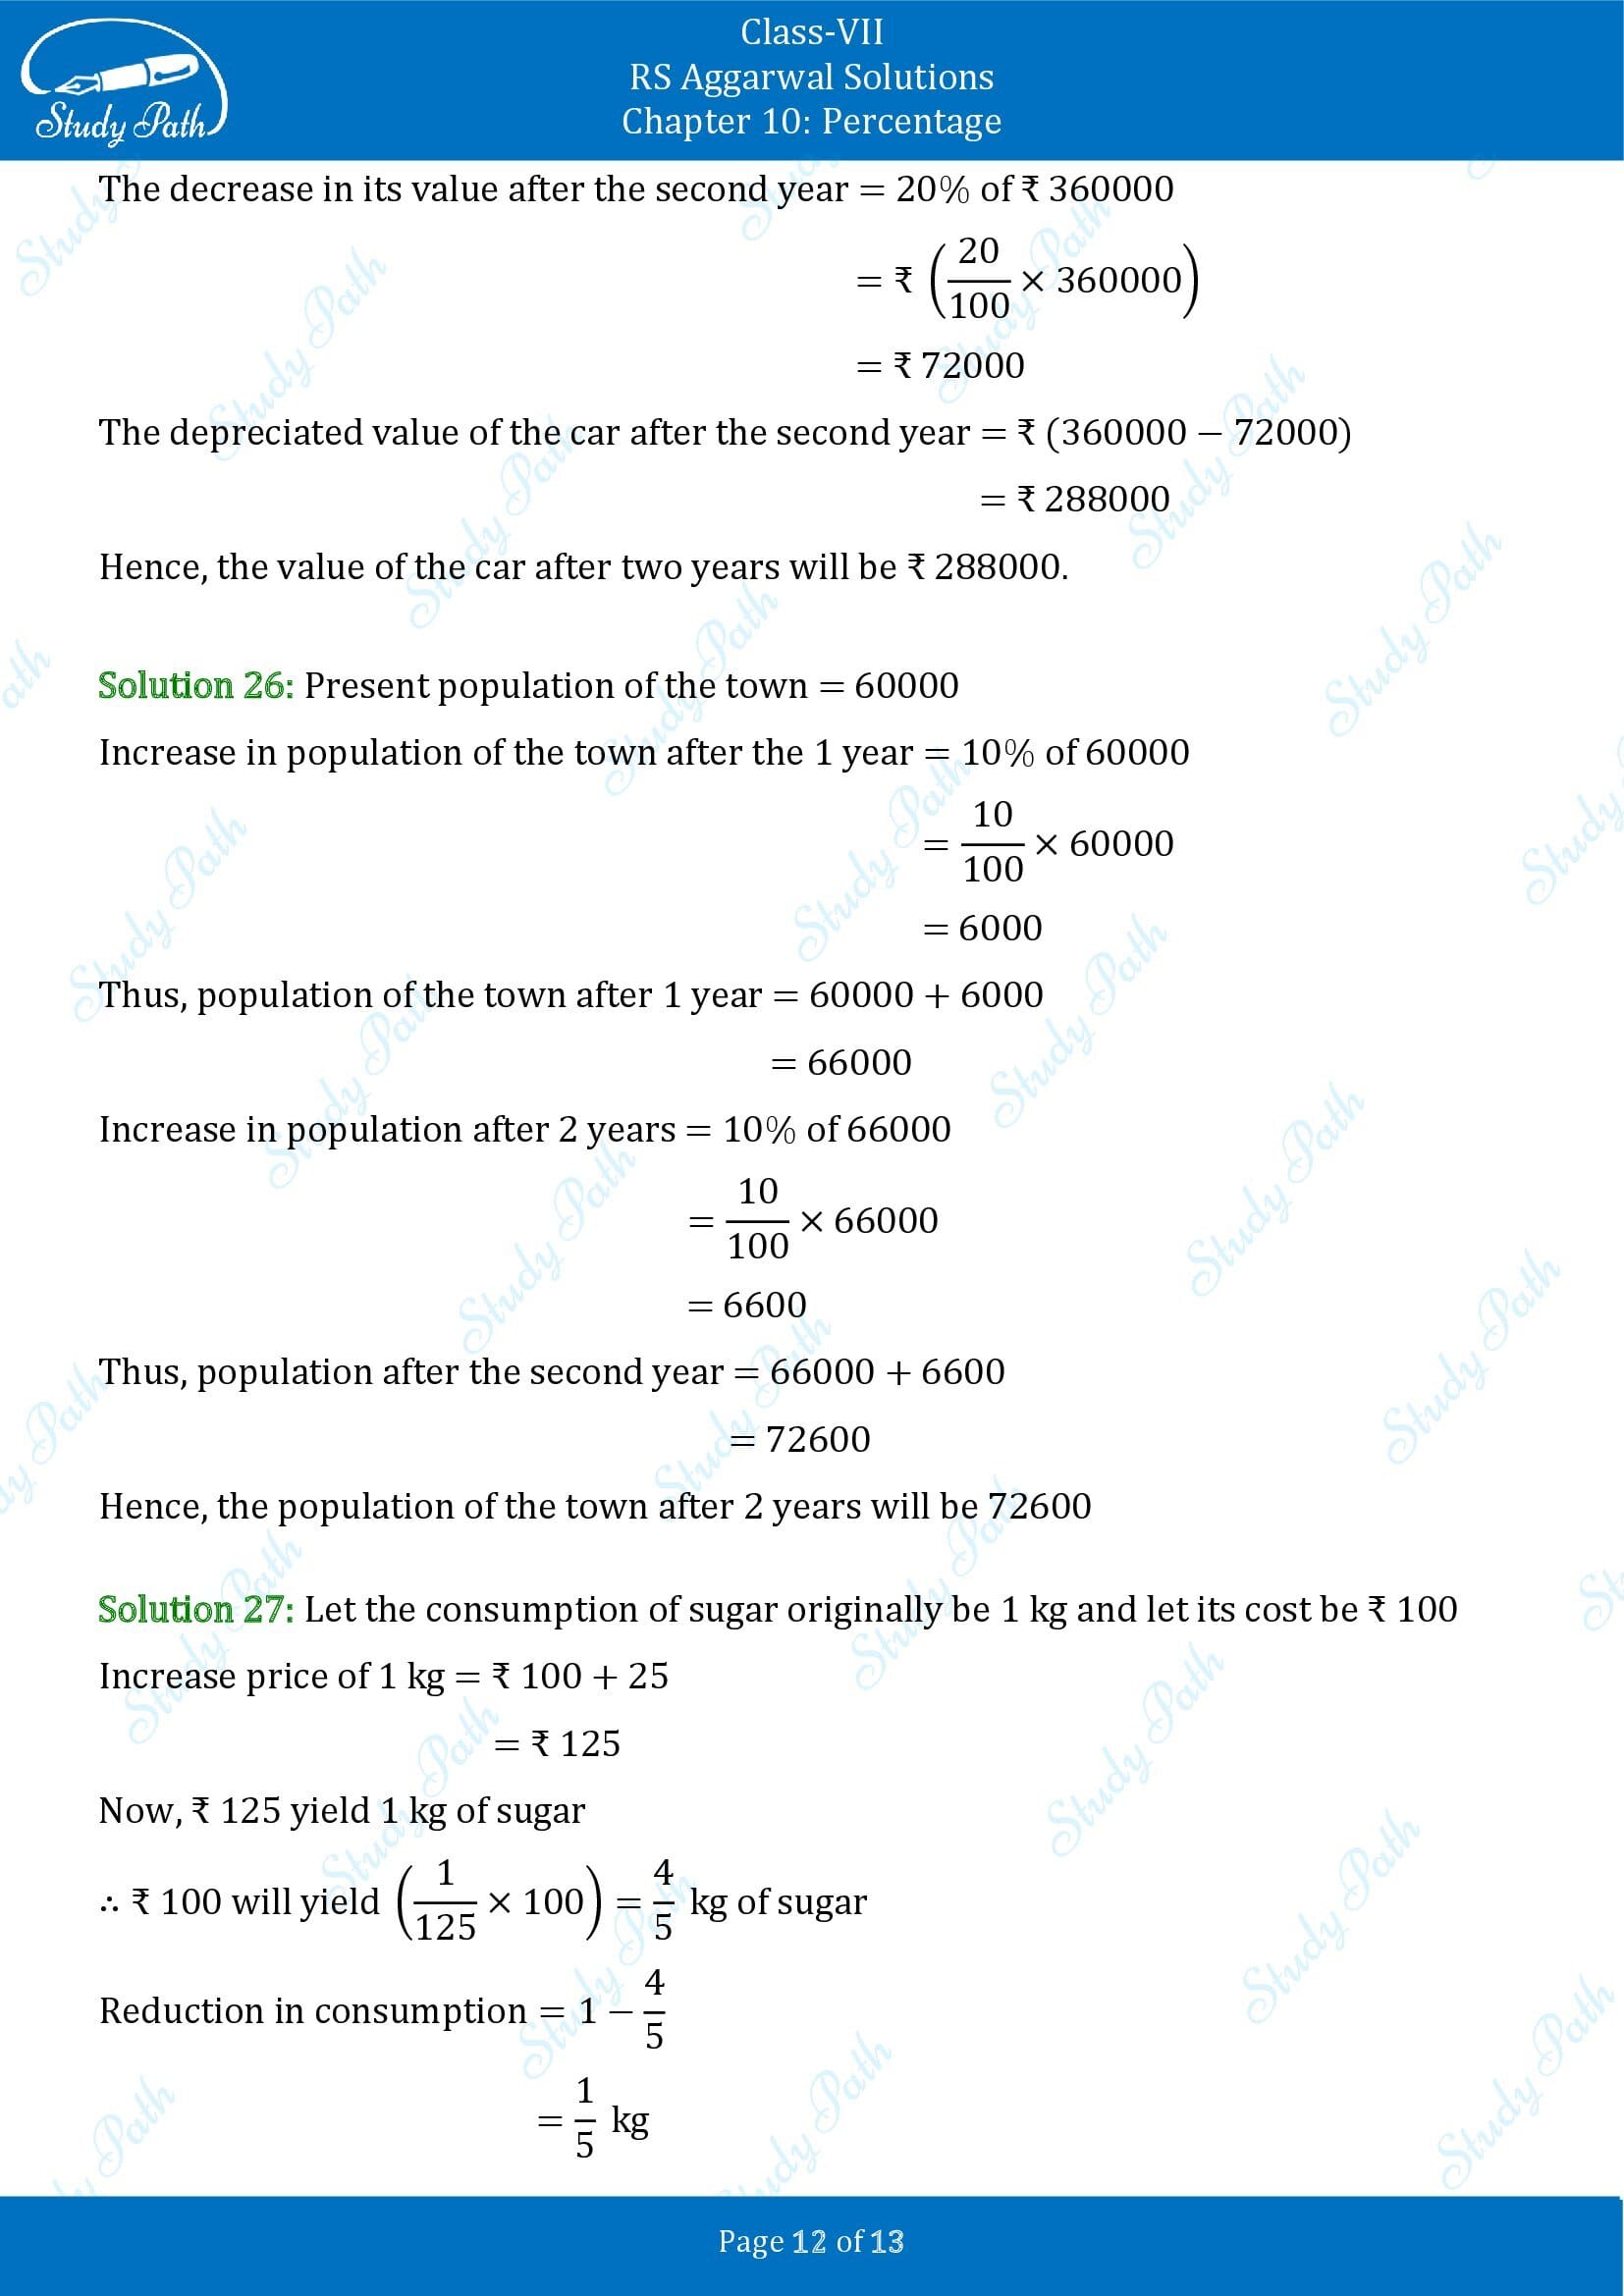 RS Aggarwal Solutions Class 7 Chapter 10 Percentage Exercise 10B 00012